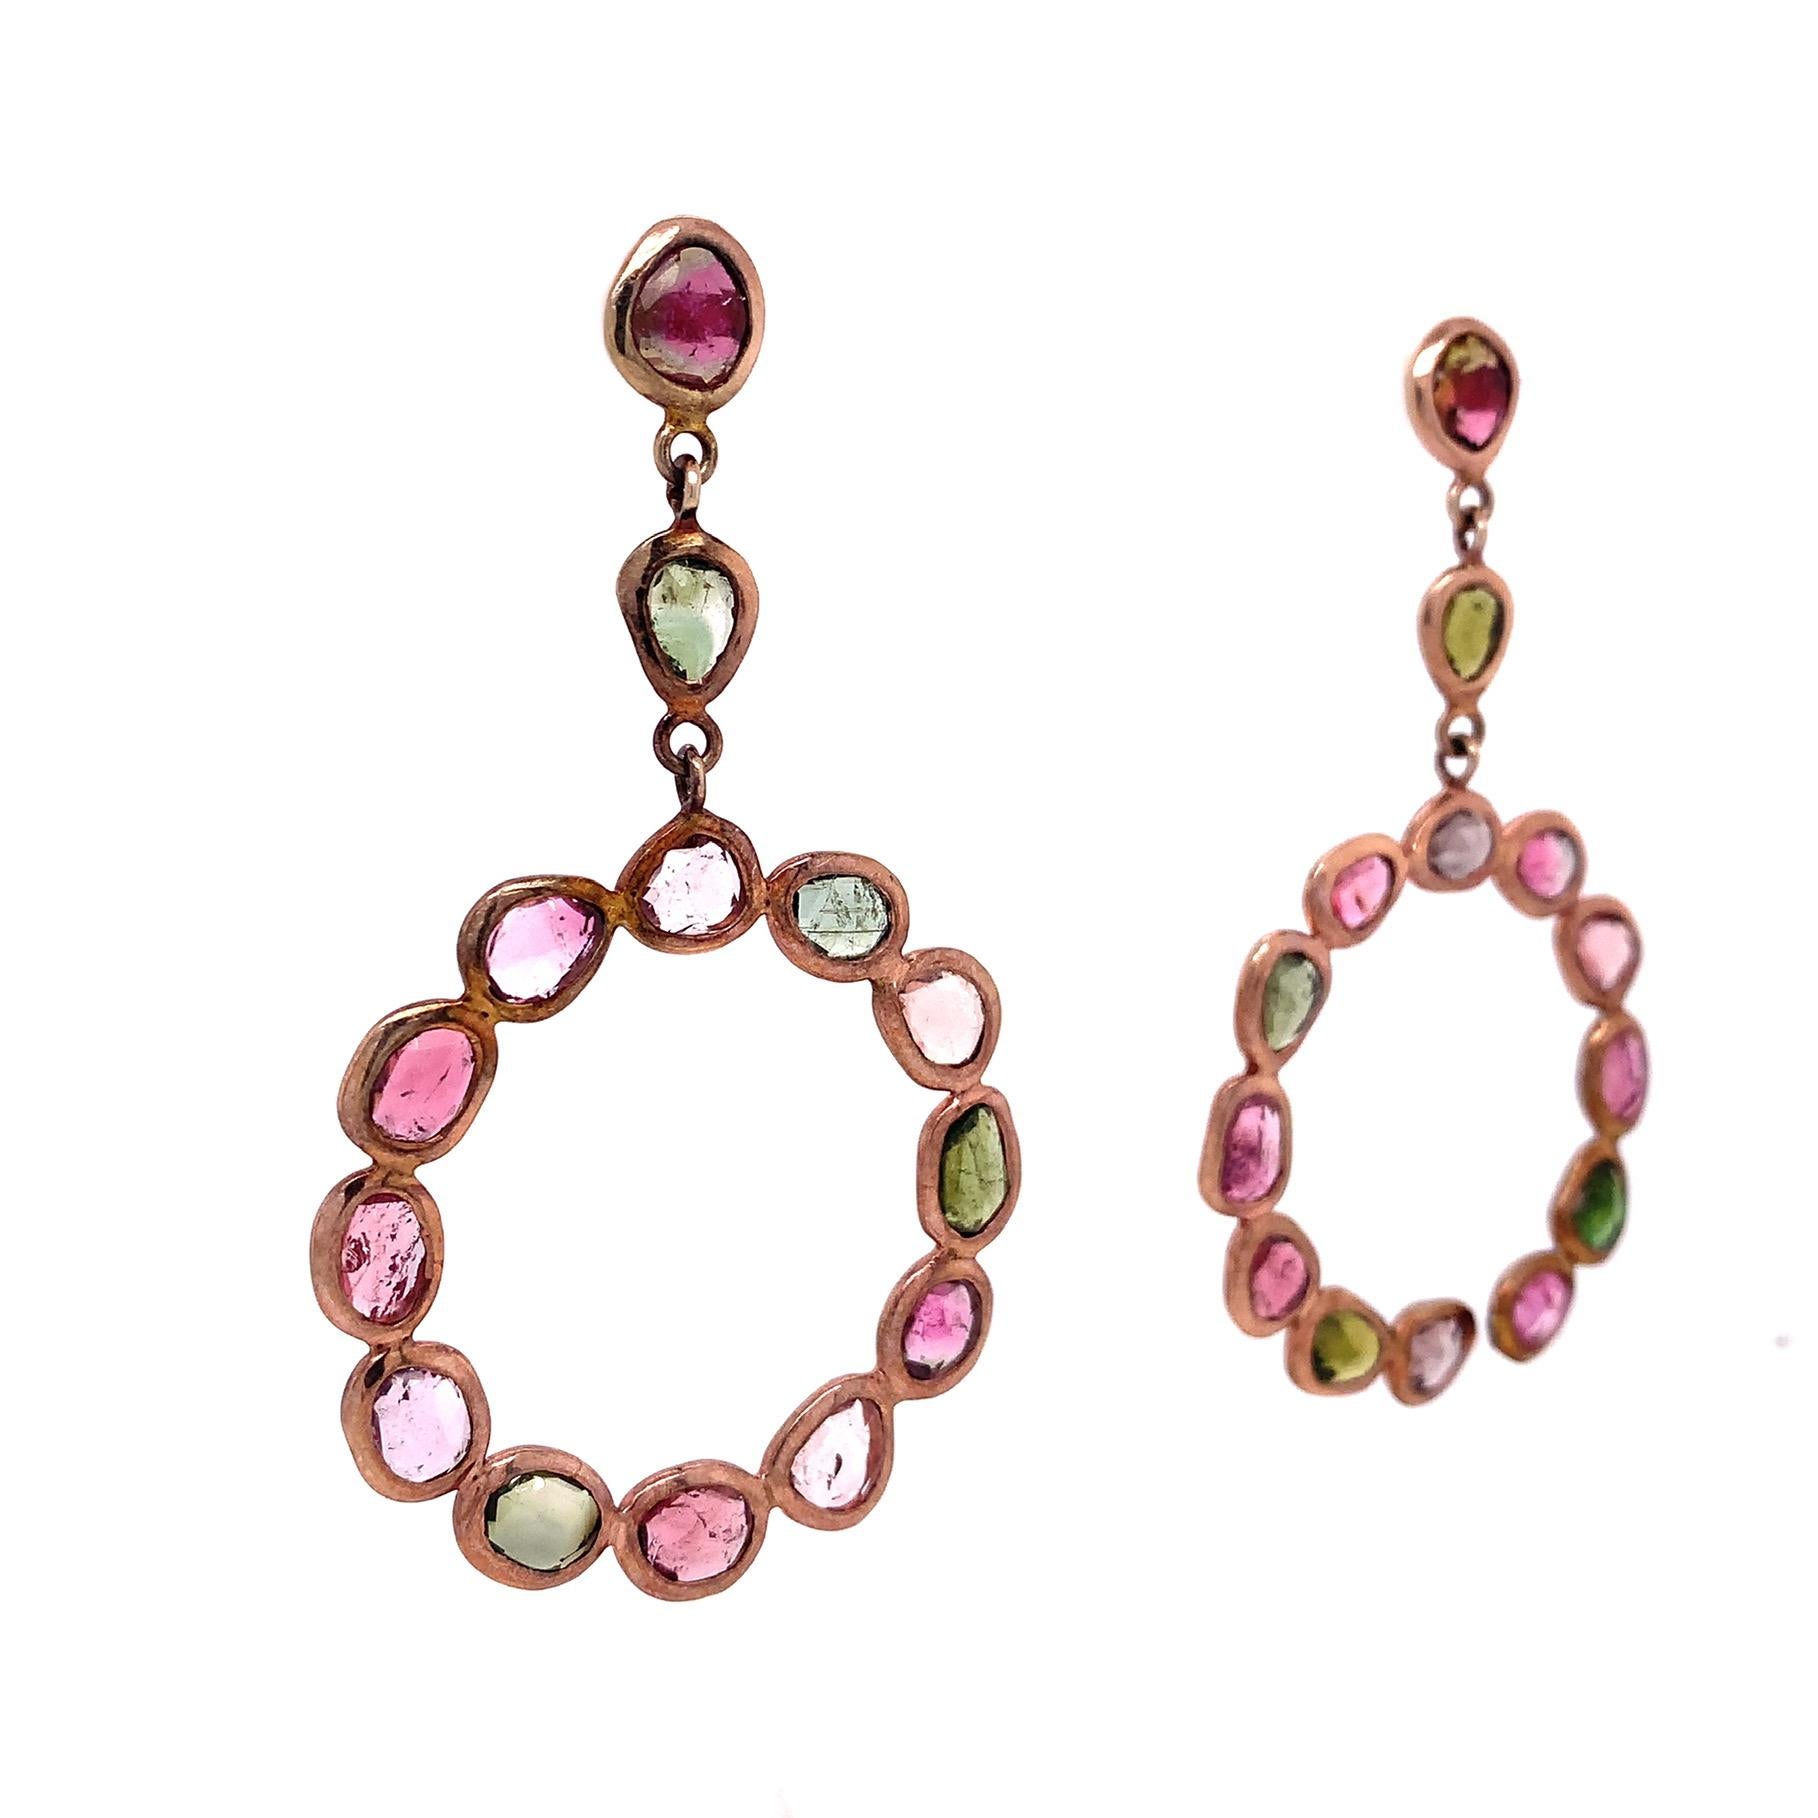 Life in color Collection

Multicolor Tourmaline wrapped in bezel rose gold plated featuring circle drop earring set in Sterling Silver.

Tourmaline: 14.92ct total weight.